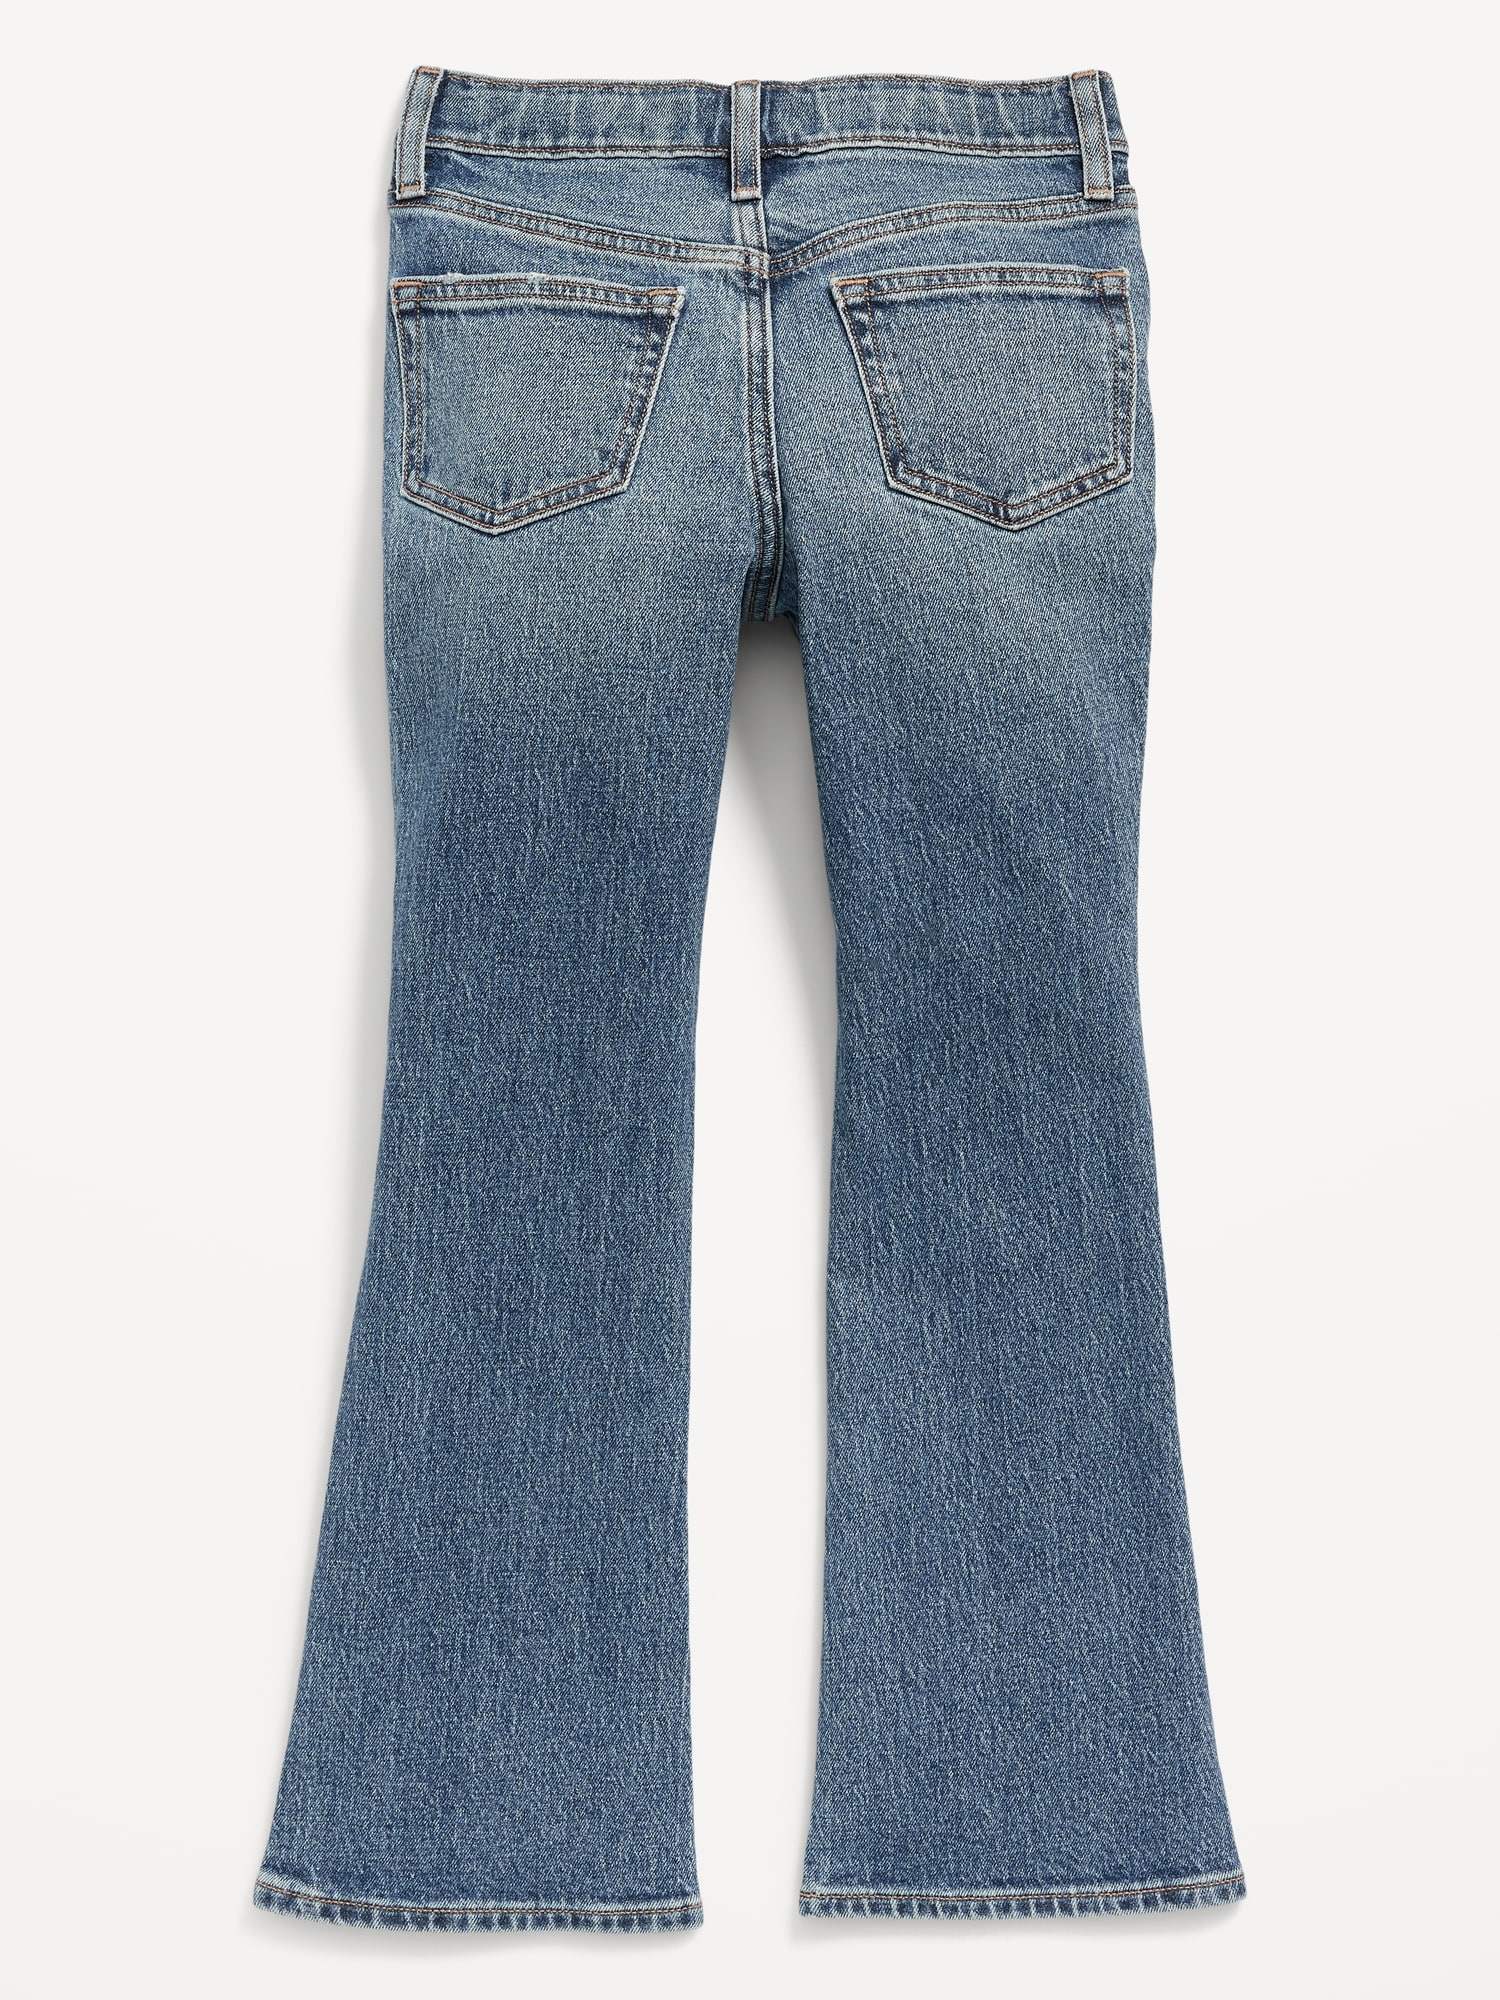 Old Navy Campeche Blue Stretch Denim High Rise Flare Jeans 14 - $31 - From  Meg